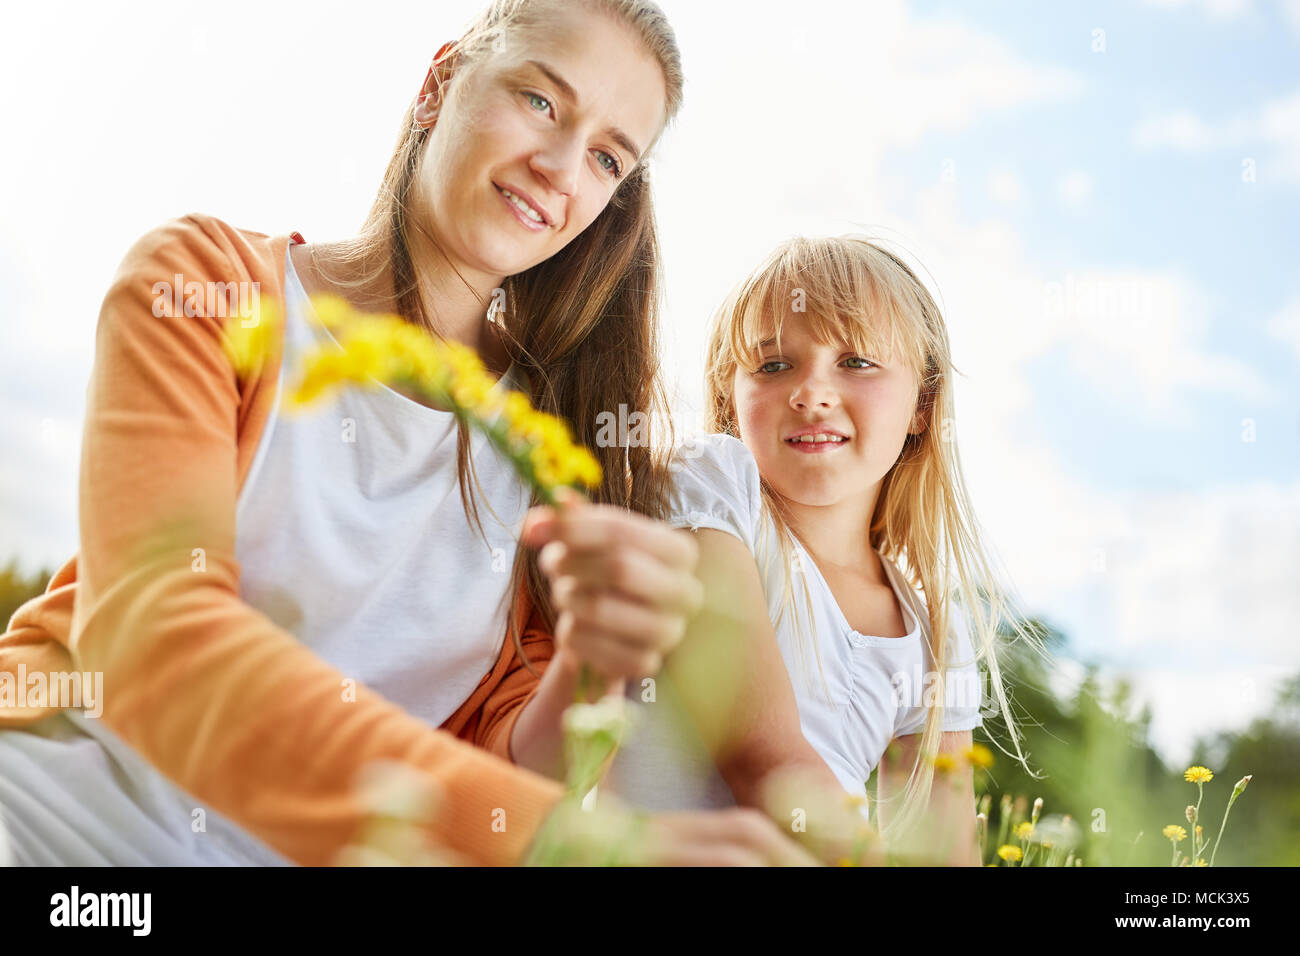 Mother and daughter tie a flower wreath from dandelion flowers Stock Photo